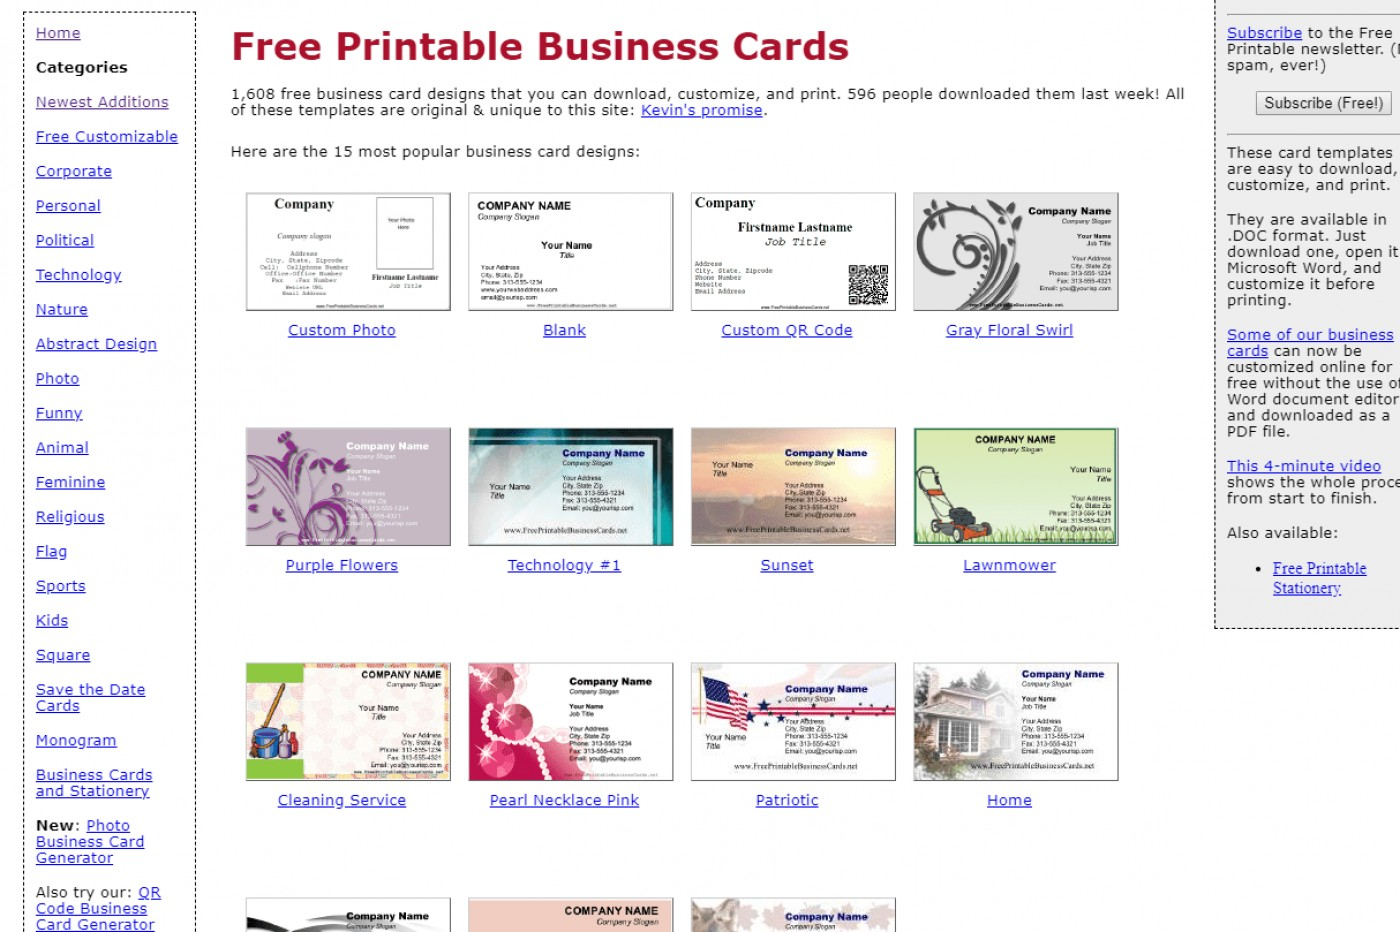 026 Free Printable Business Cards Blank Card Template Throughout Word 2013 Business Card Template